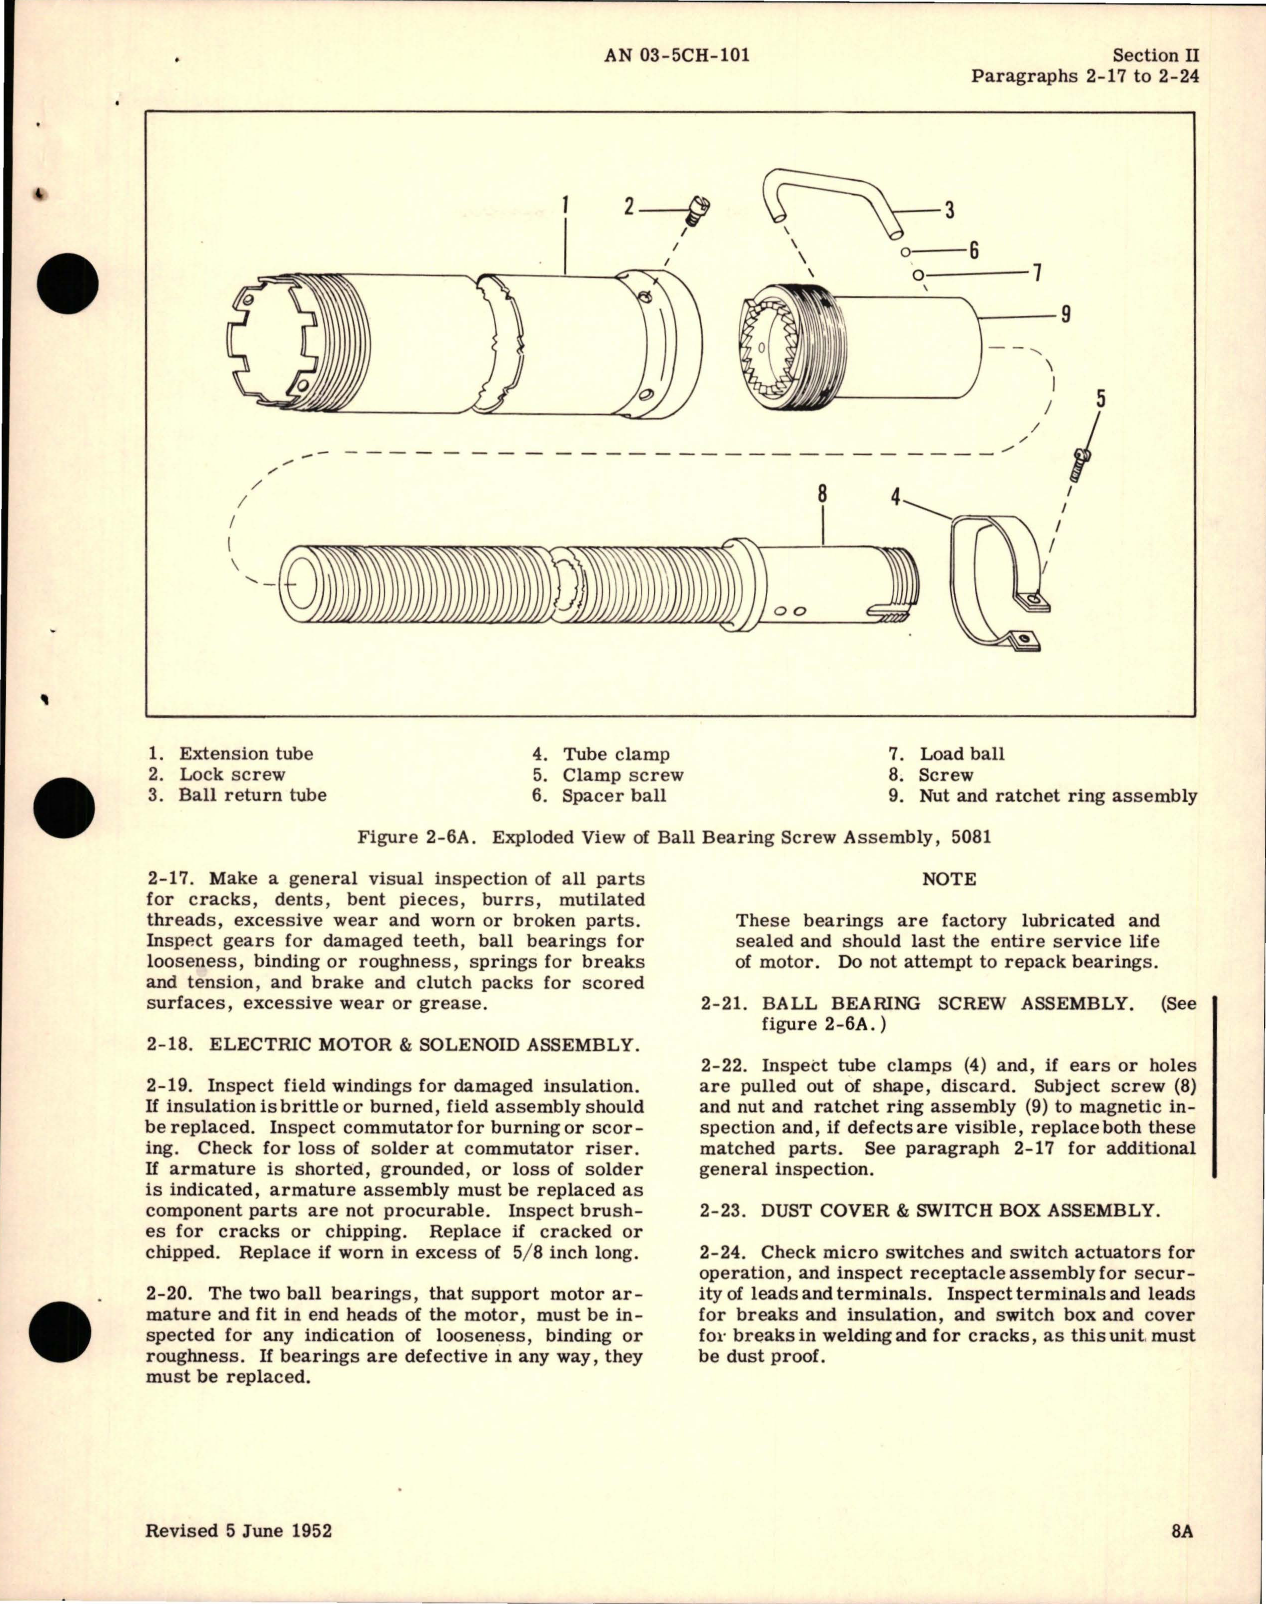 Sample page 7 from AirCorps Library document: Parts Catalog for Main Landing Gear Actuator - Part VJ-550